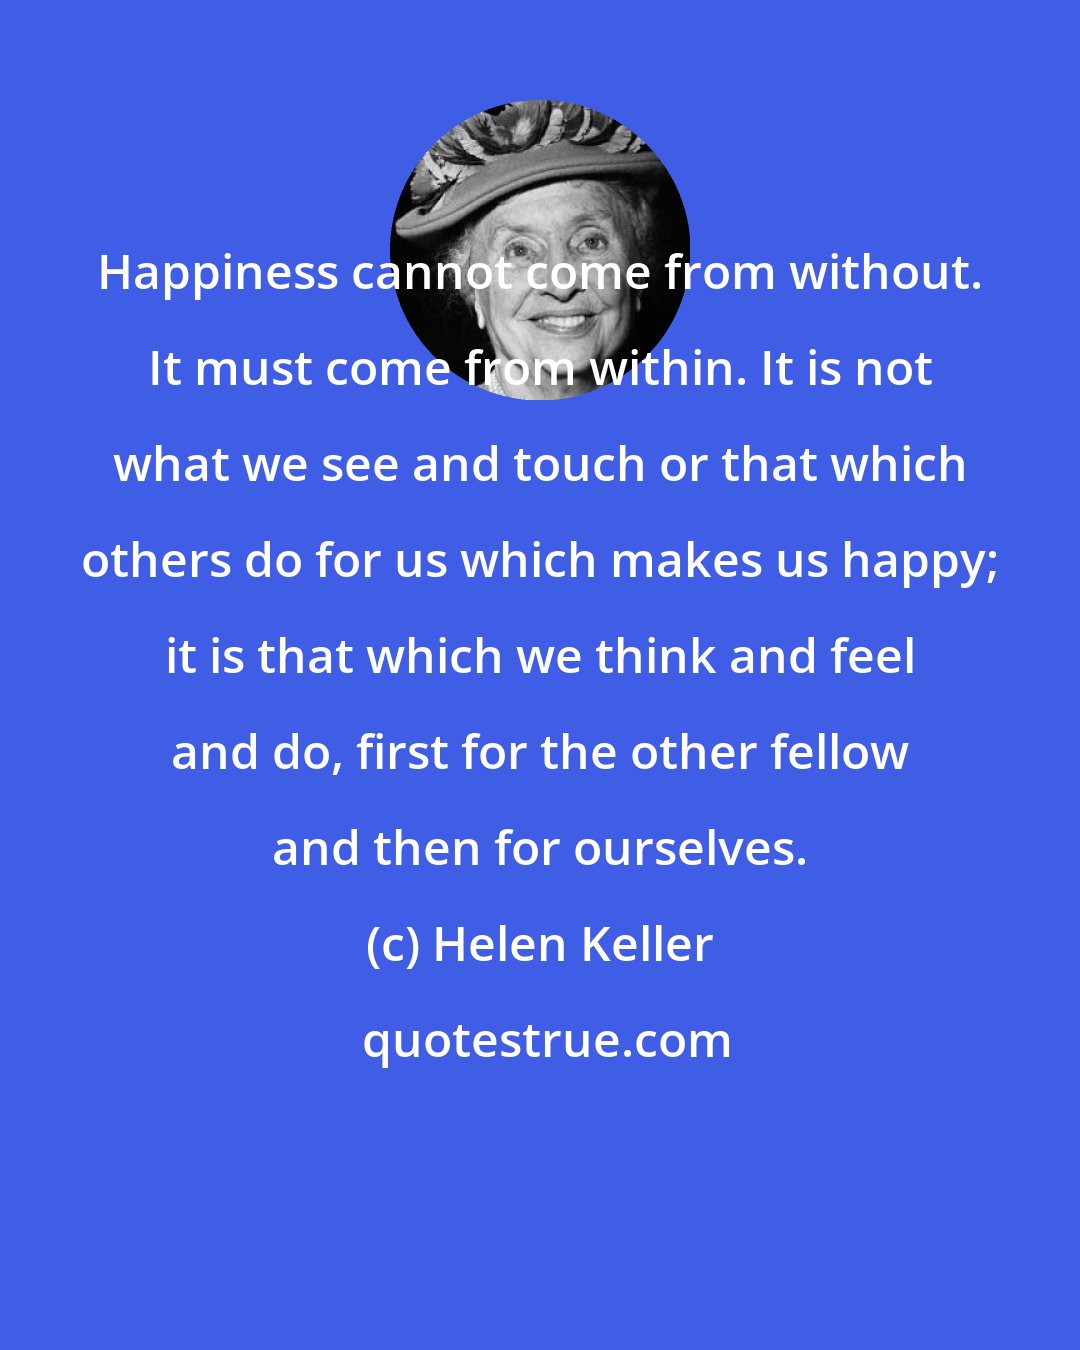 Helen Keller: Happiness cannot come from without. It must come from within. It is not what we see and touch or that which others do for us which makes us happy; it is that which we think and feel and do, first for the other fellow and then for ourselves.